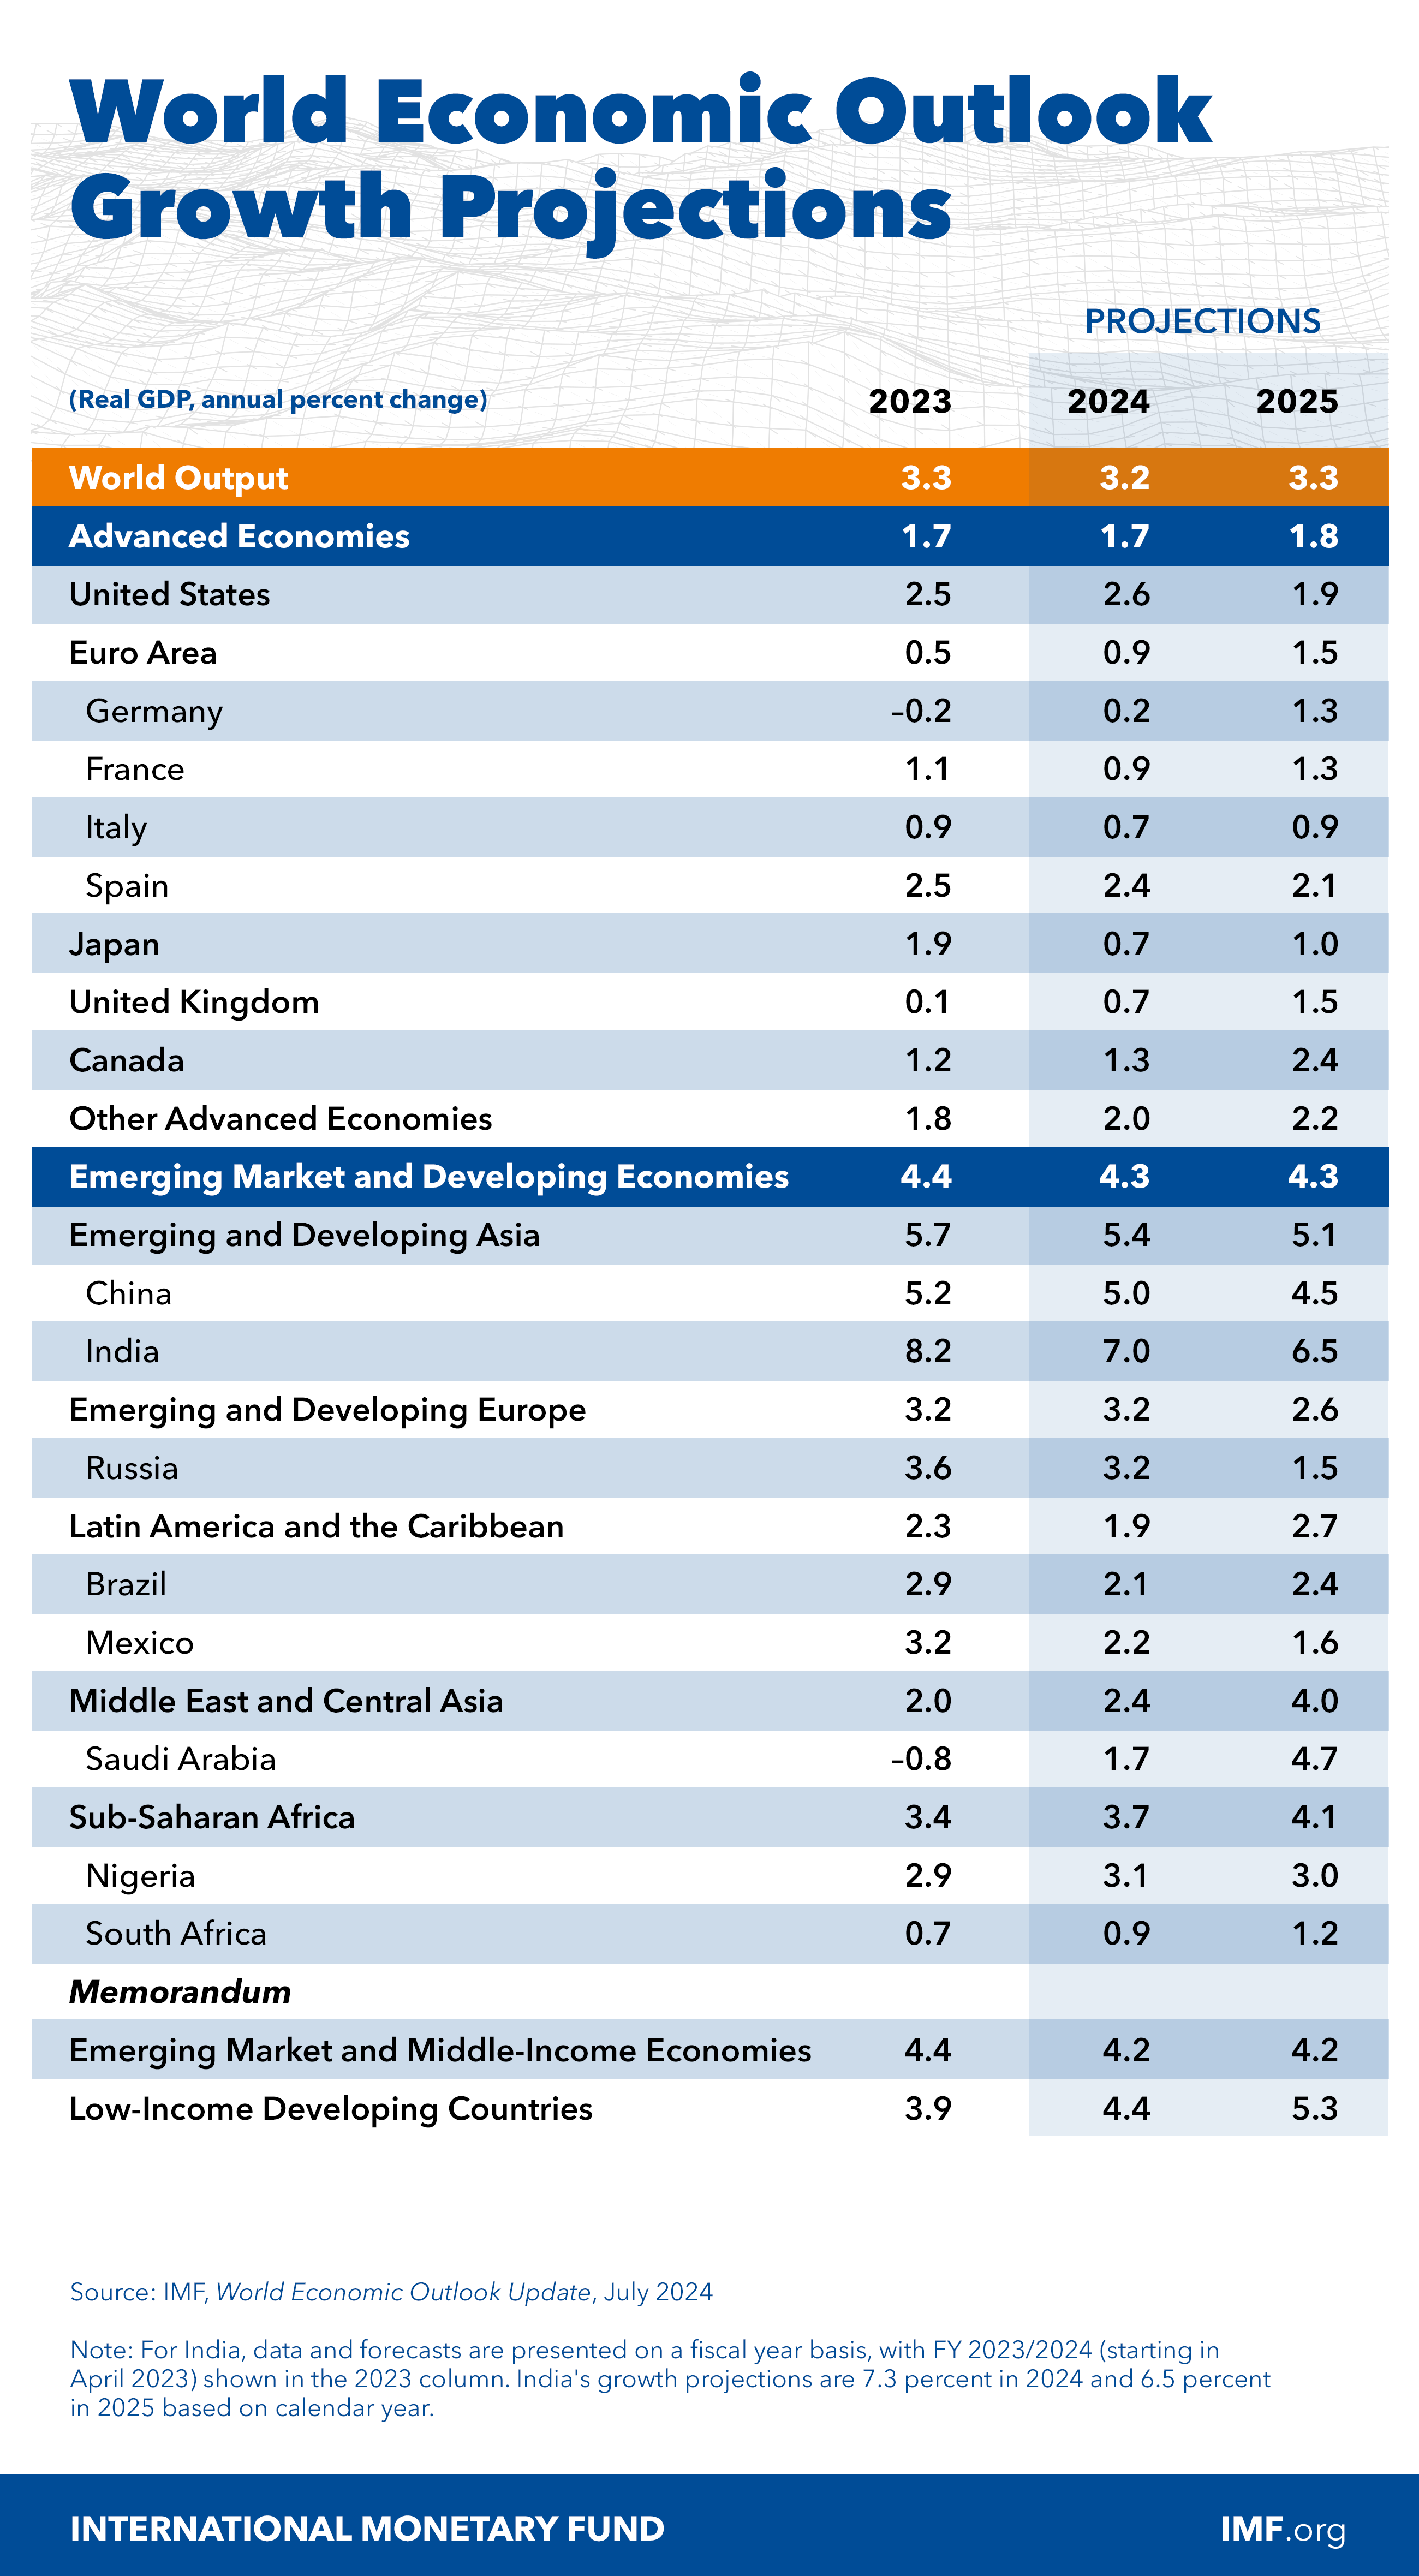 World Economic Outlook Update, July 2024: Projections Table